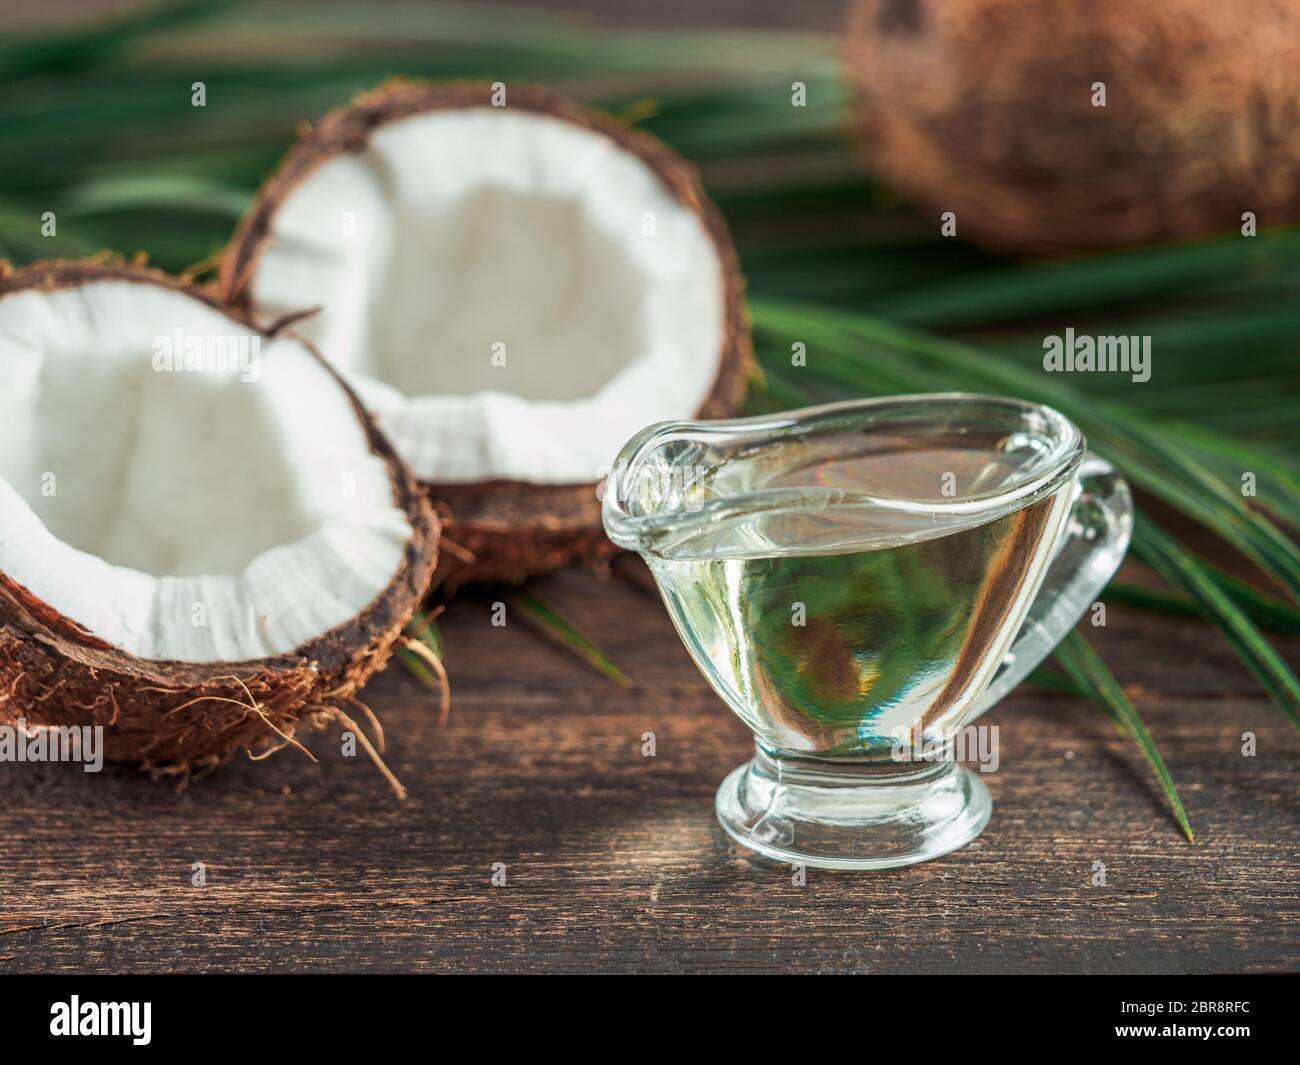 Liquid coconut MCT oil and halved coco-nut on wooden table. Health Benefits of MCT Oil. MCT or medium-chain triglycerides, form of saturated fatty aci Stock Photo